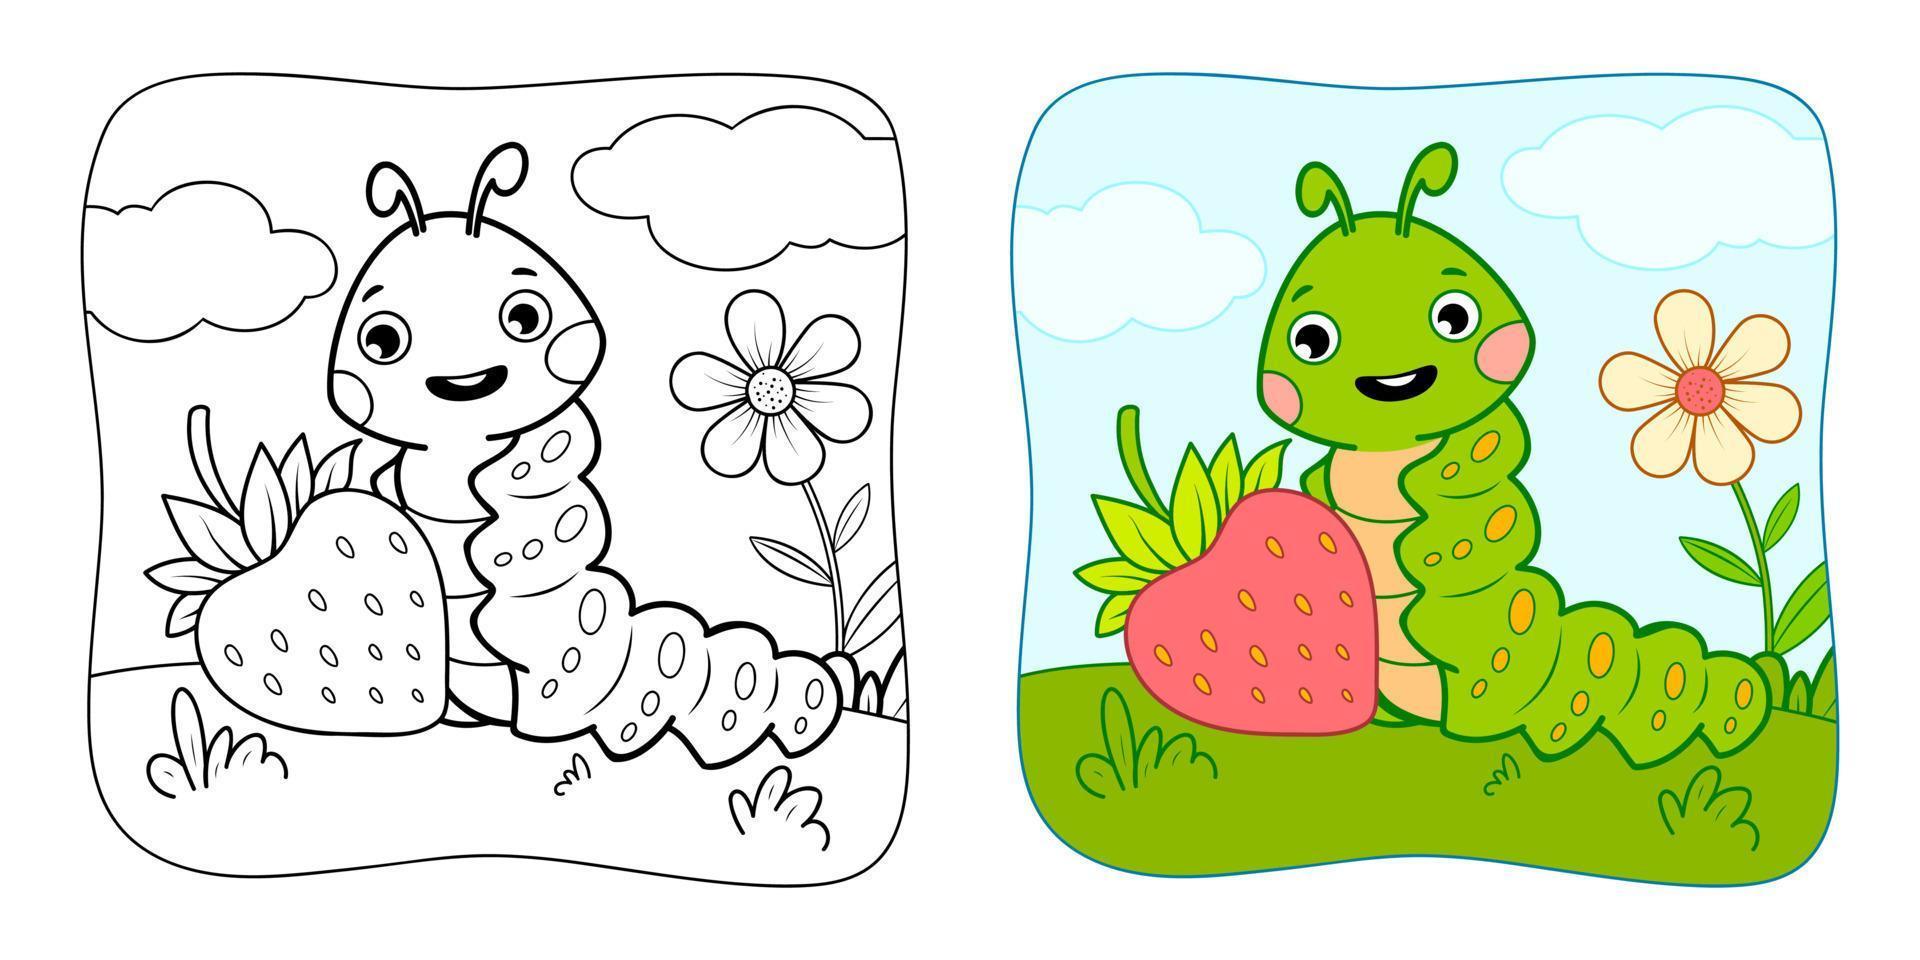 Coloring book or Coloring page for kids. Caterpillar vector illustration clipart. Nature background.